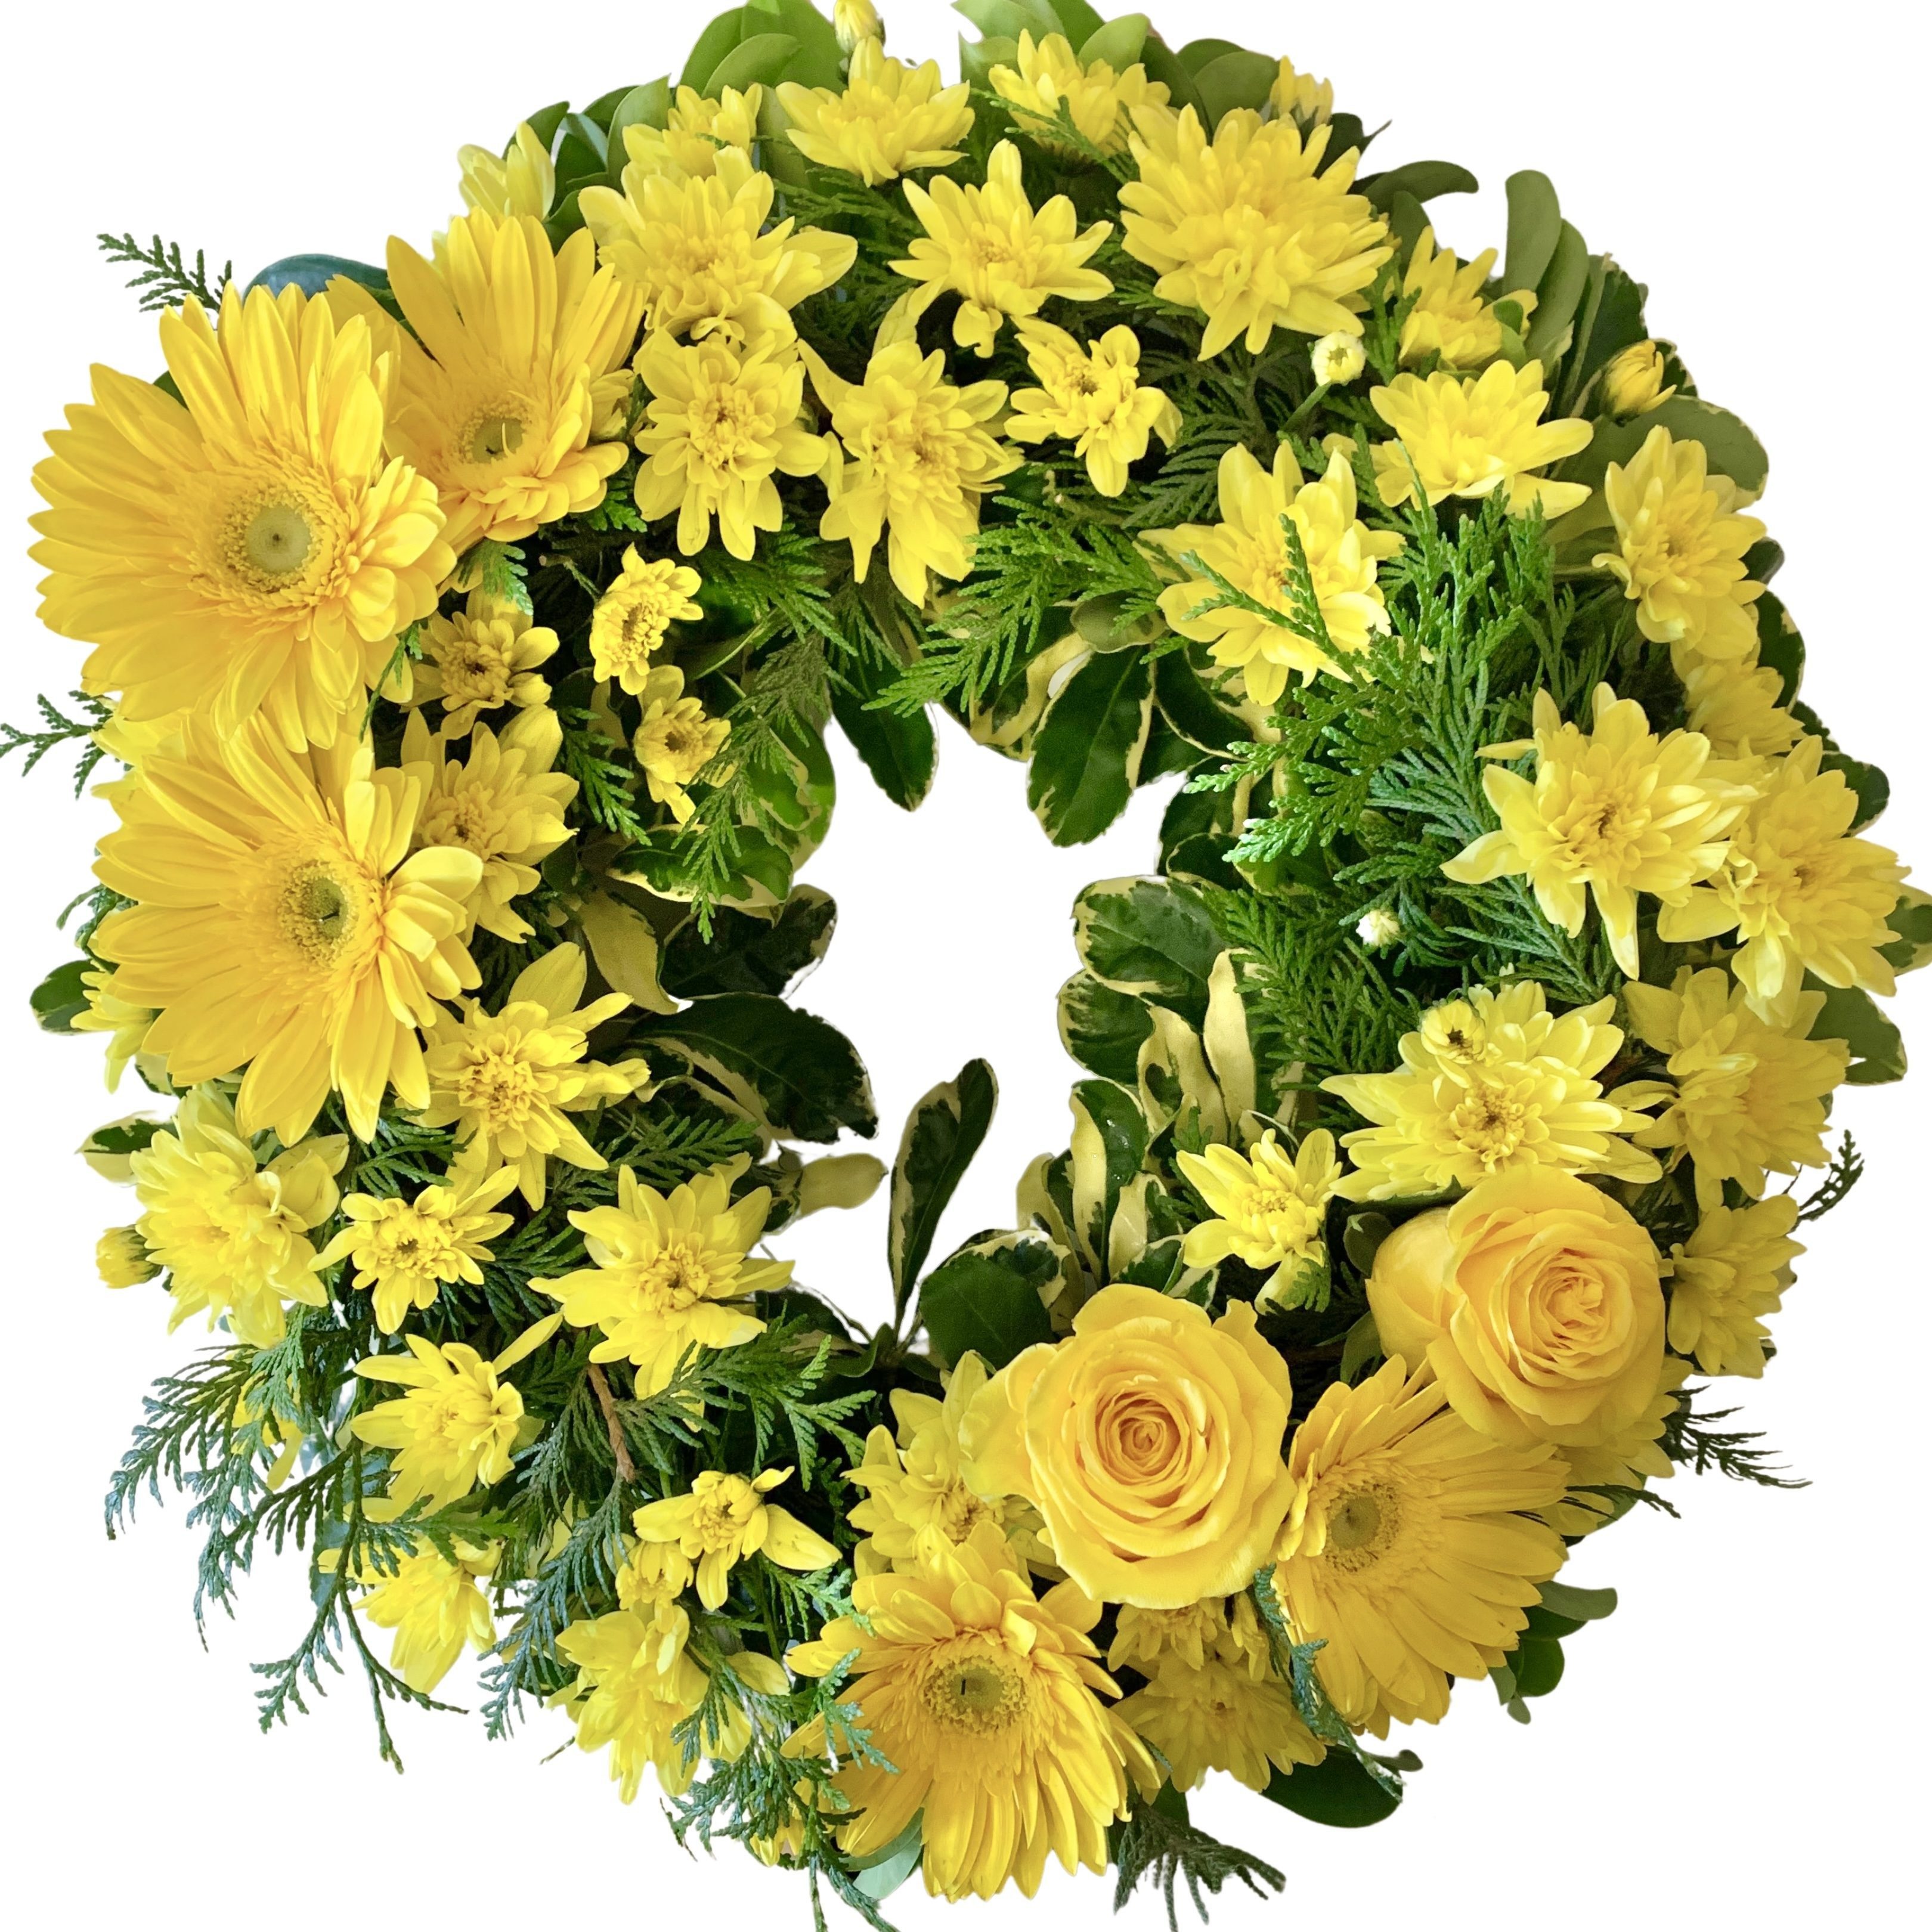 Wreath - Seasonal Blooms in Bright Colours